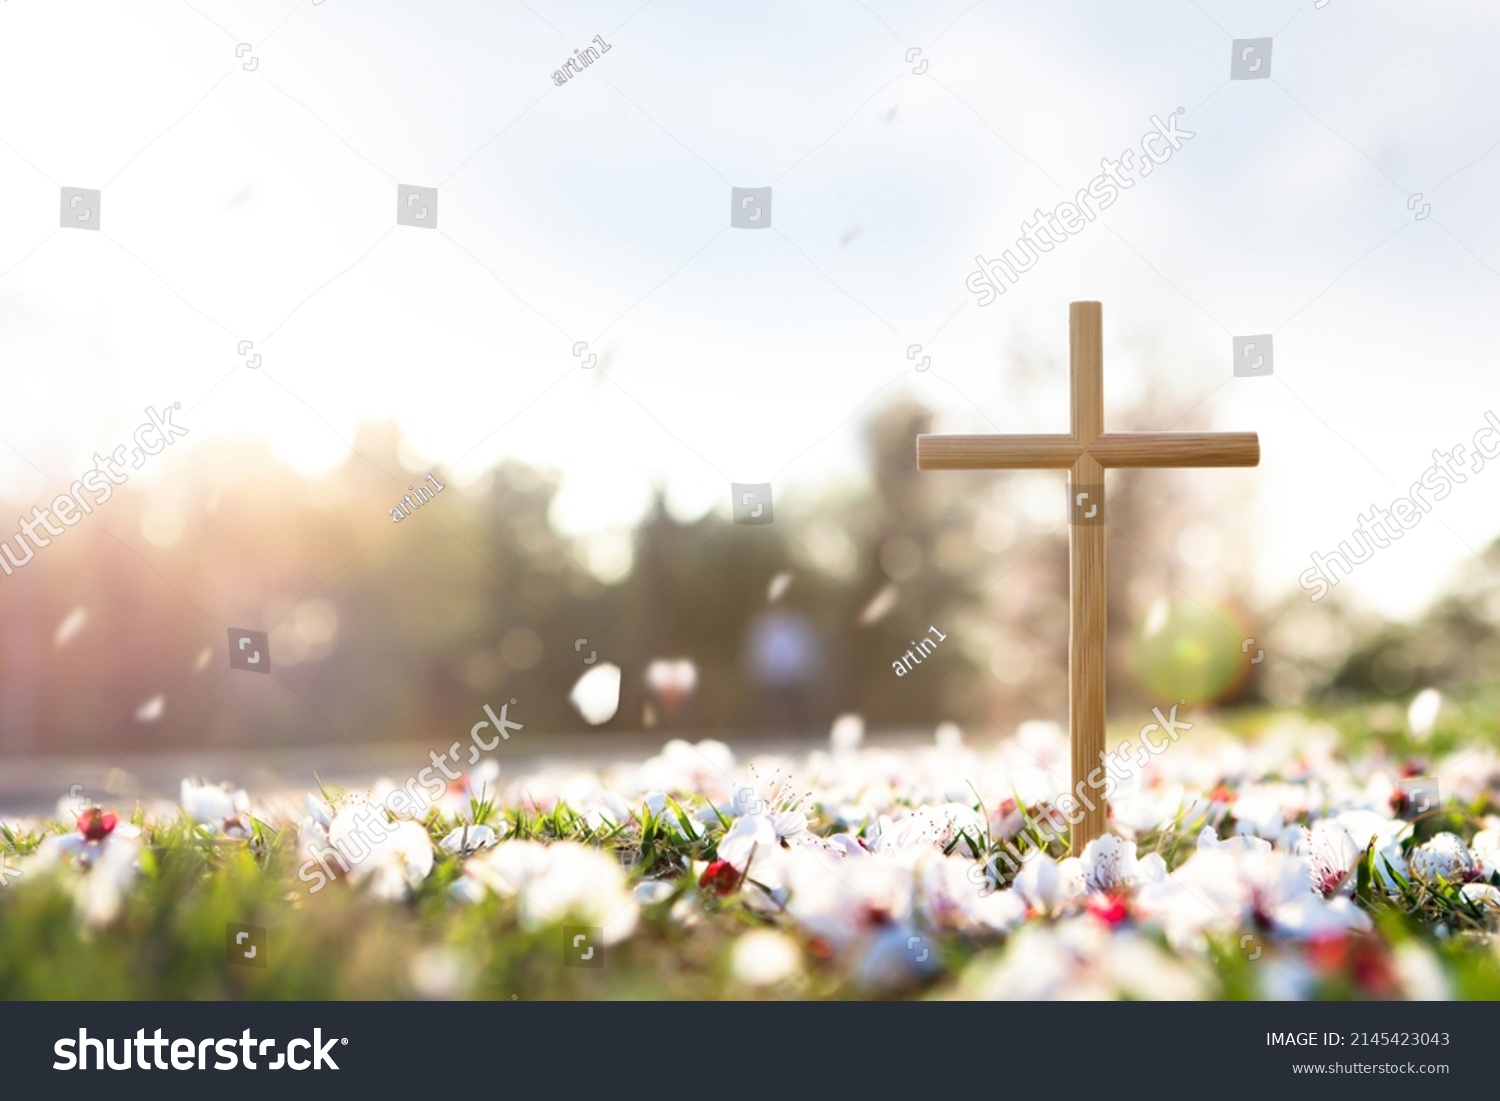 Cross symbolizing the death and resurrection of Jesus Christ, spring flowers, falling petals and bright sunlight
 #2145423043